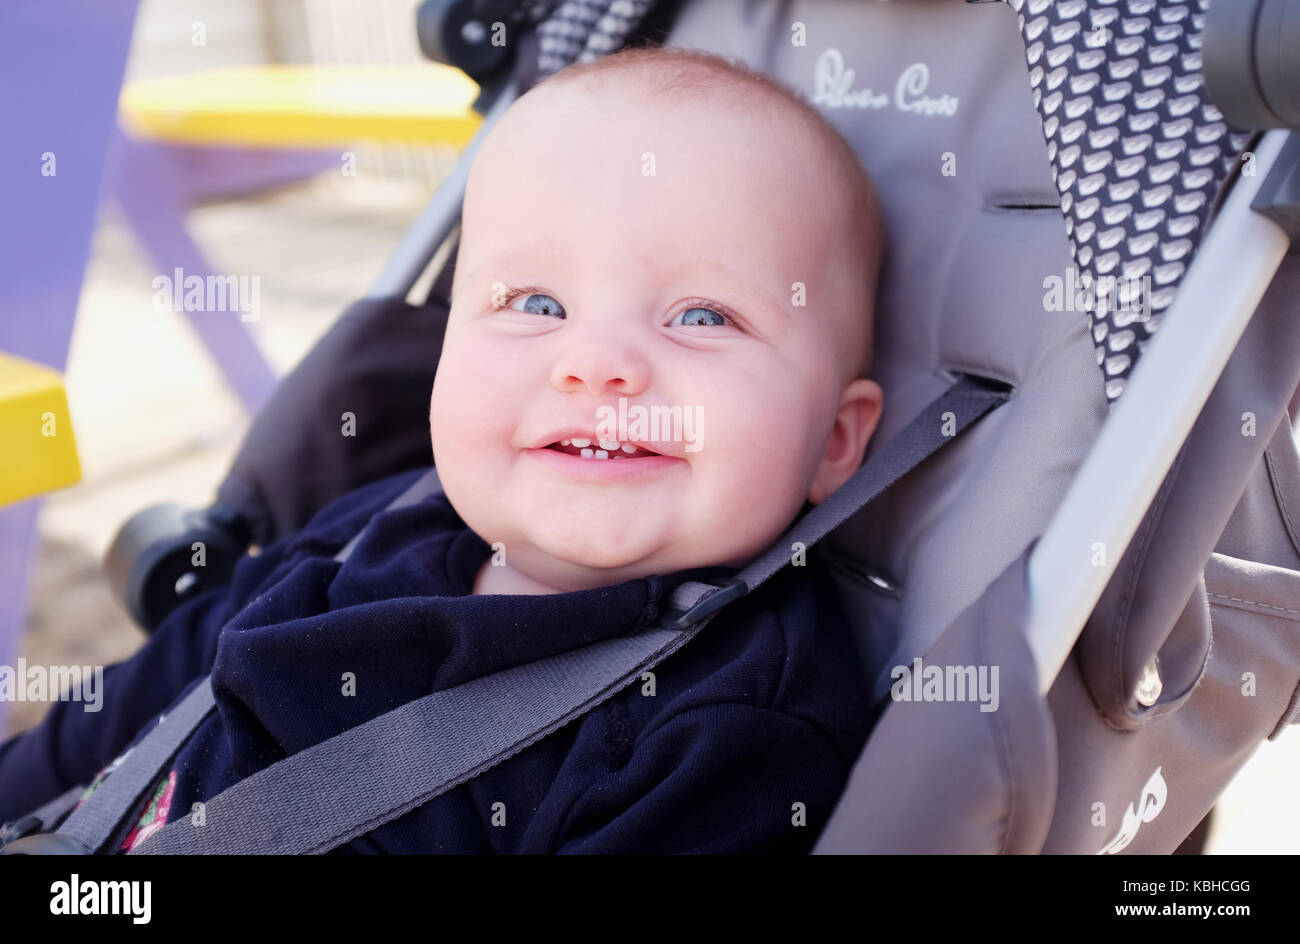 10 month old baby female smiling with new teeth teething UK Stock Photo